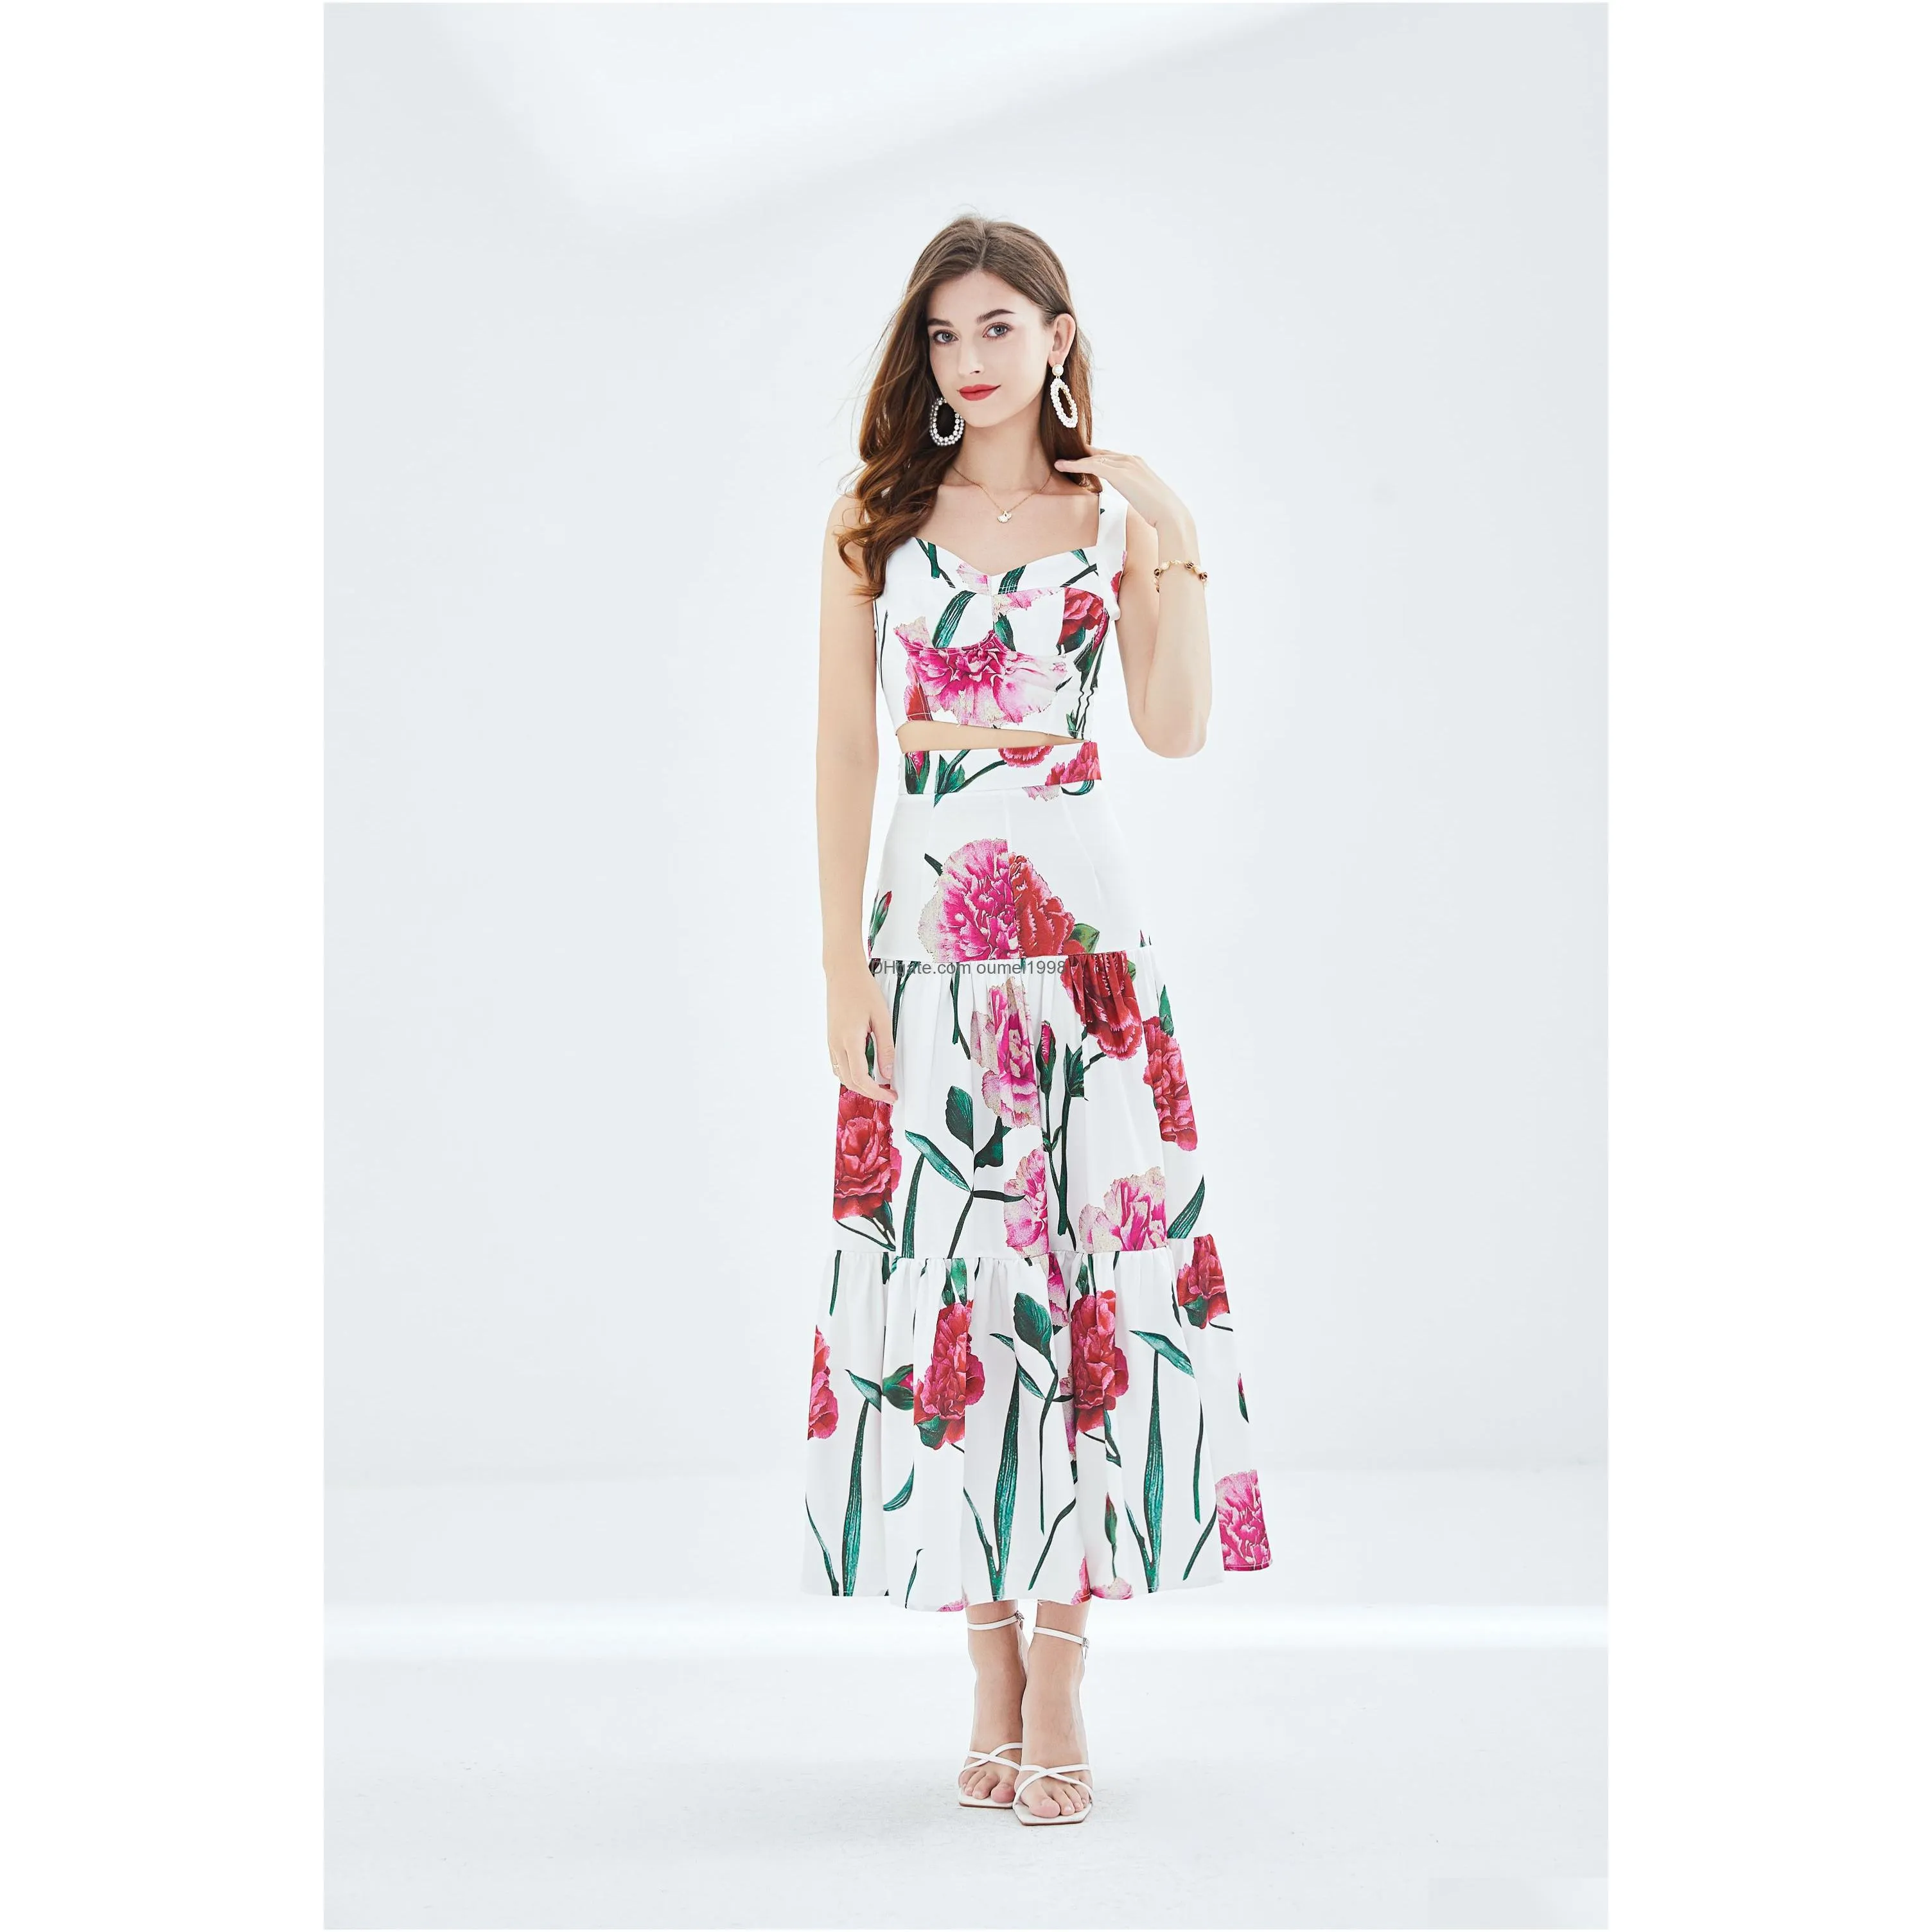 Two Piece Dress Summer Runway Sicily Floral Matching Outfits Womens Short Spaghetti Strap Crop Top Long Maxi Vacation Skirt 2 Set Dro Dhfax